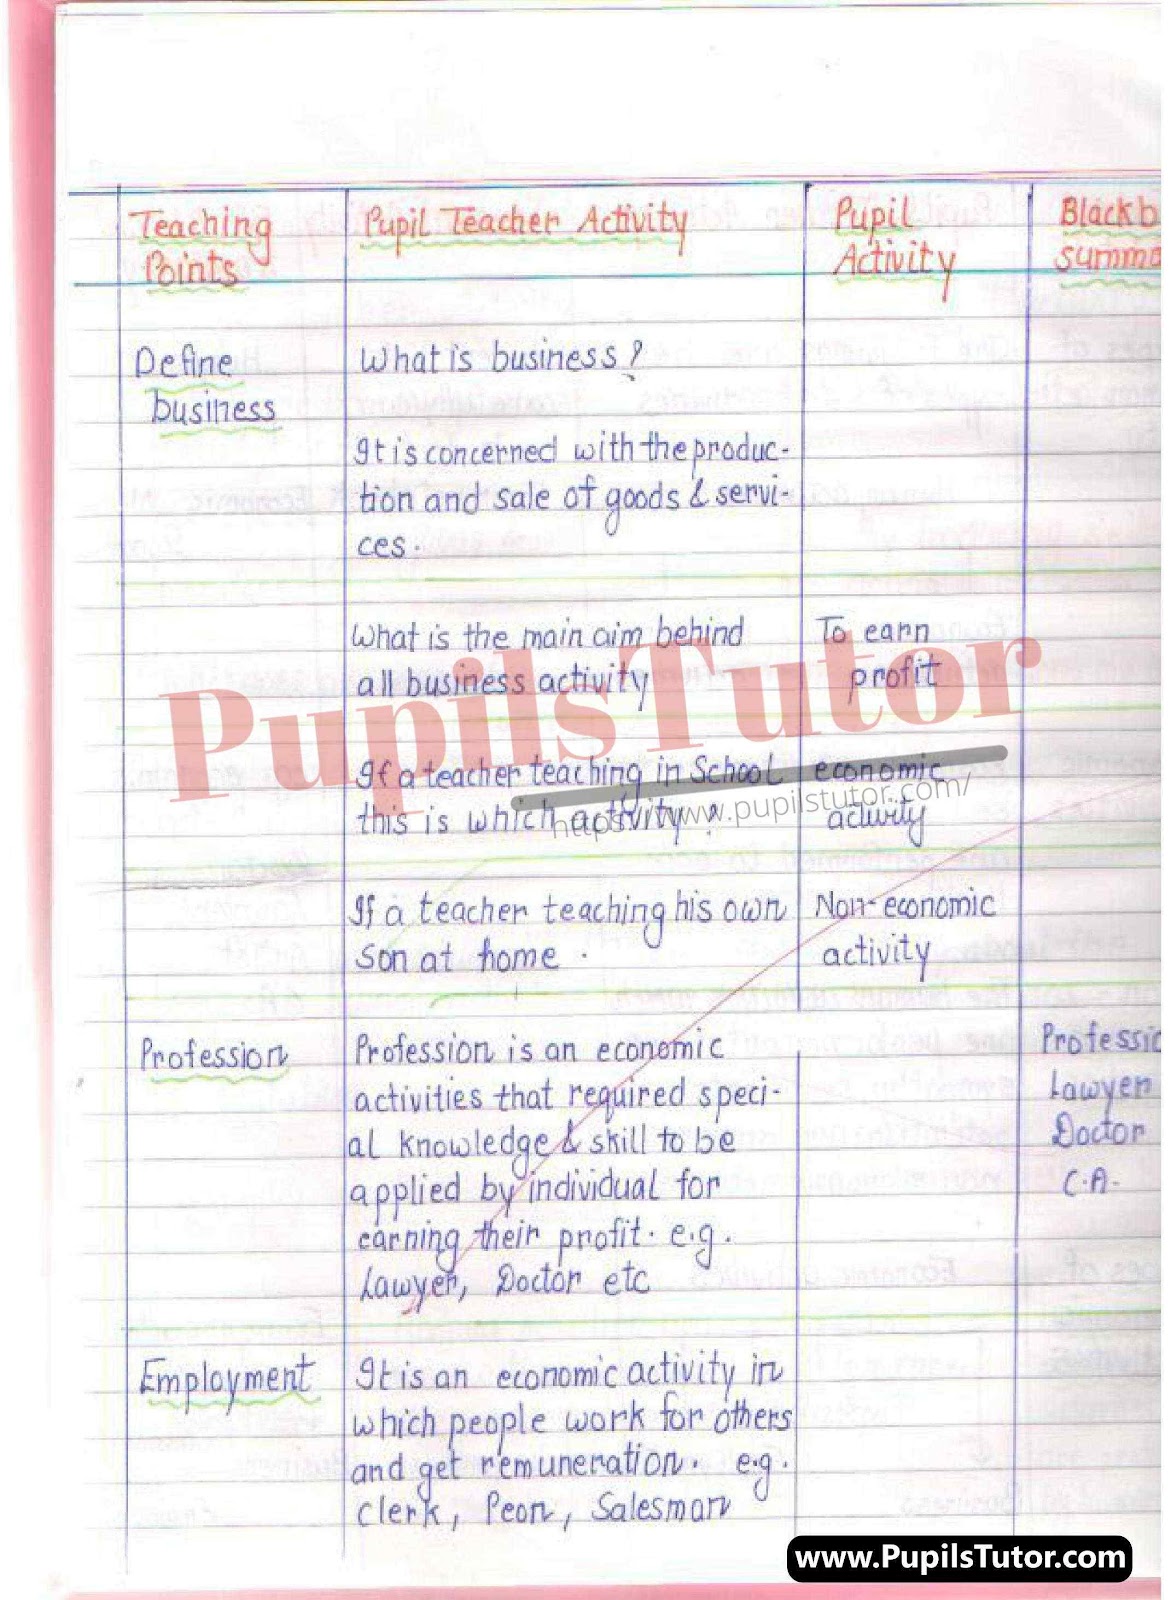 Class/Grade 11 Business Studies Lesson Plan On Human And Business Activities For CBSE NCERT KVS School And University College Teachers – (Page And Image Number 3) – www.pupilstutor.com